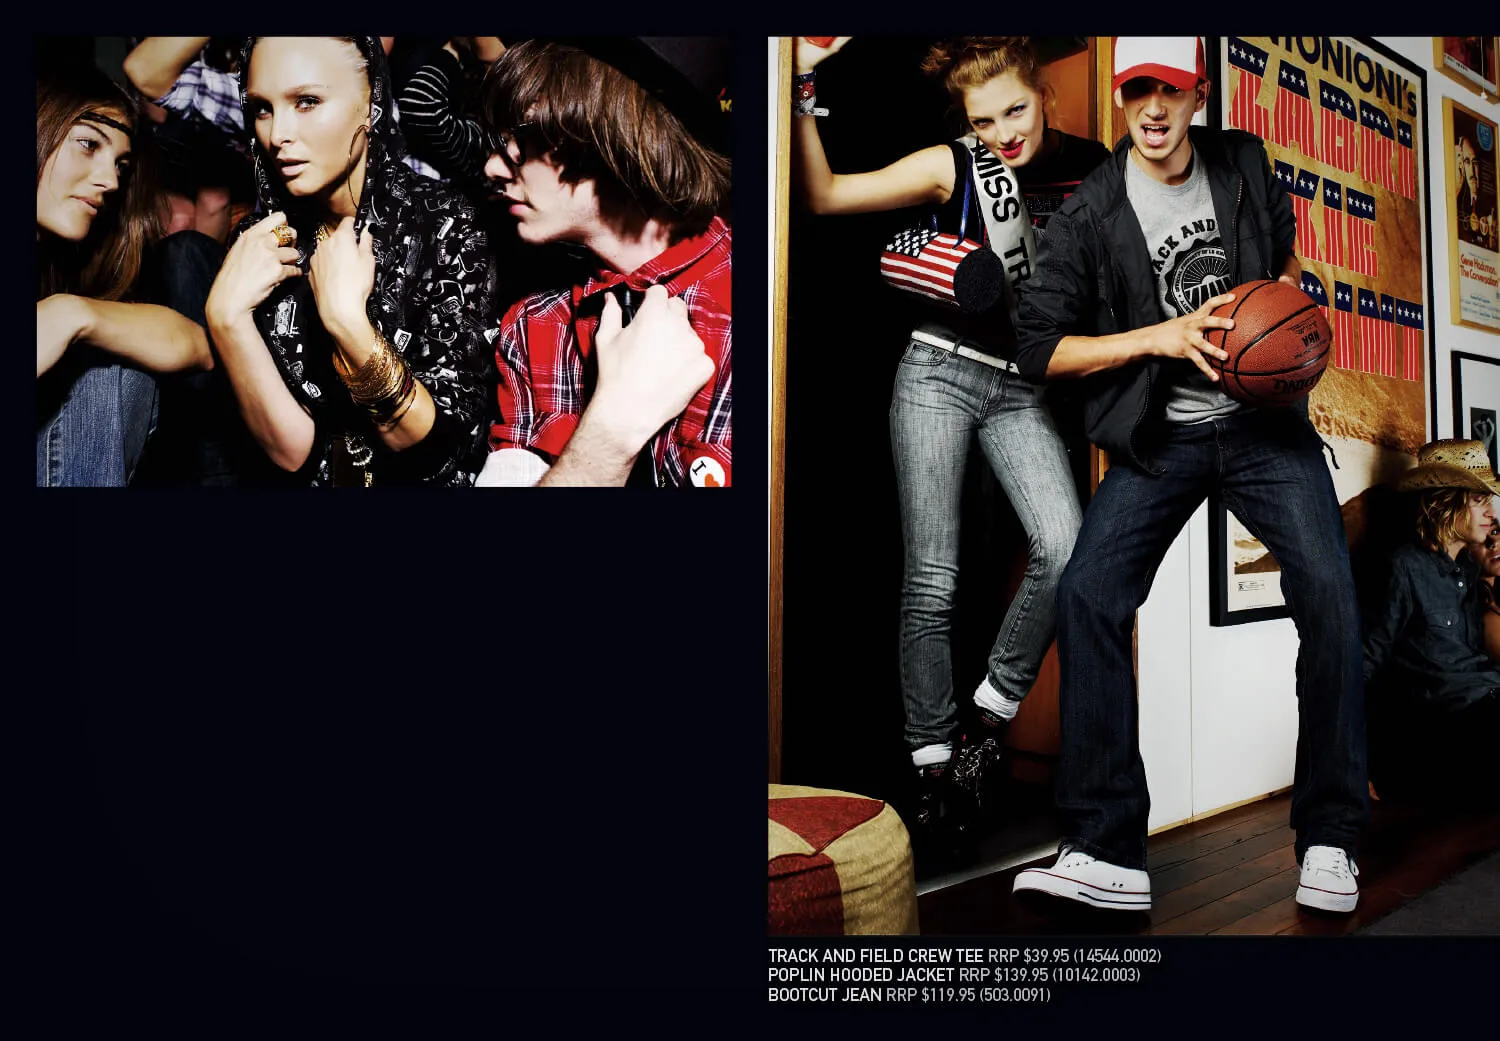 A page of a booklet for Levi's Americana new season range